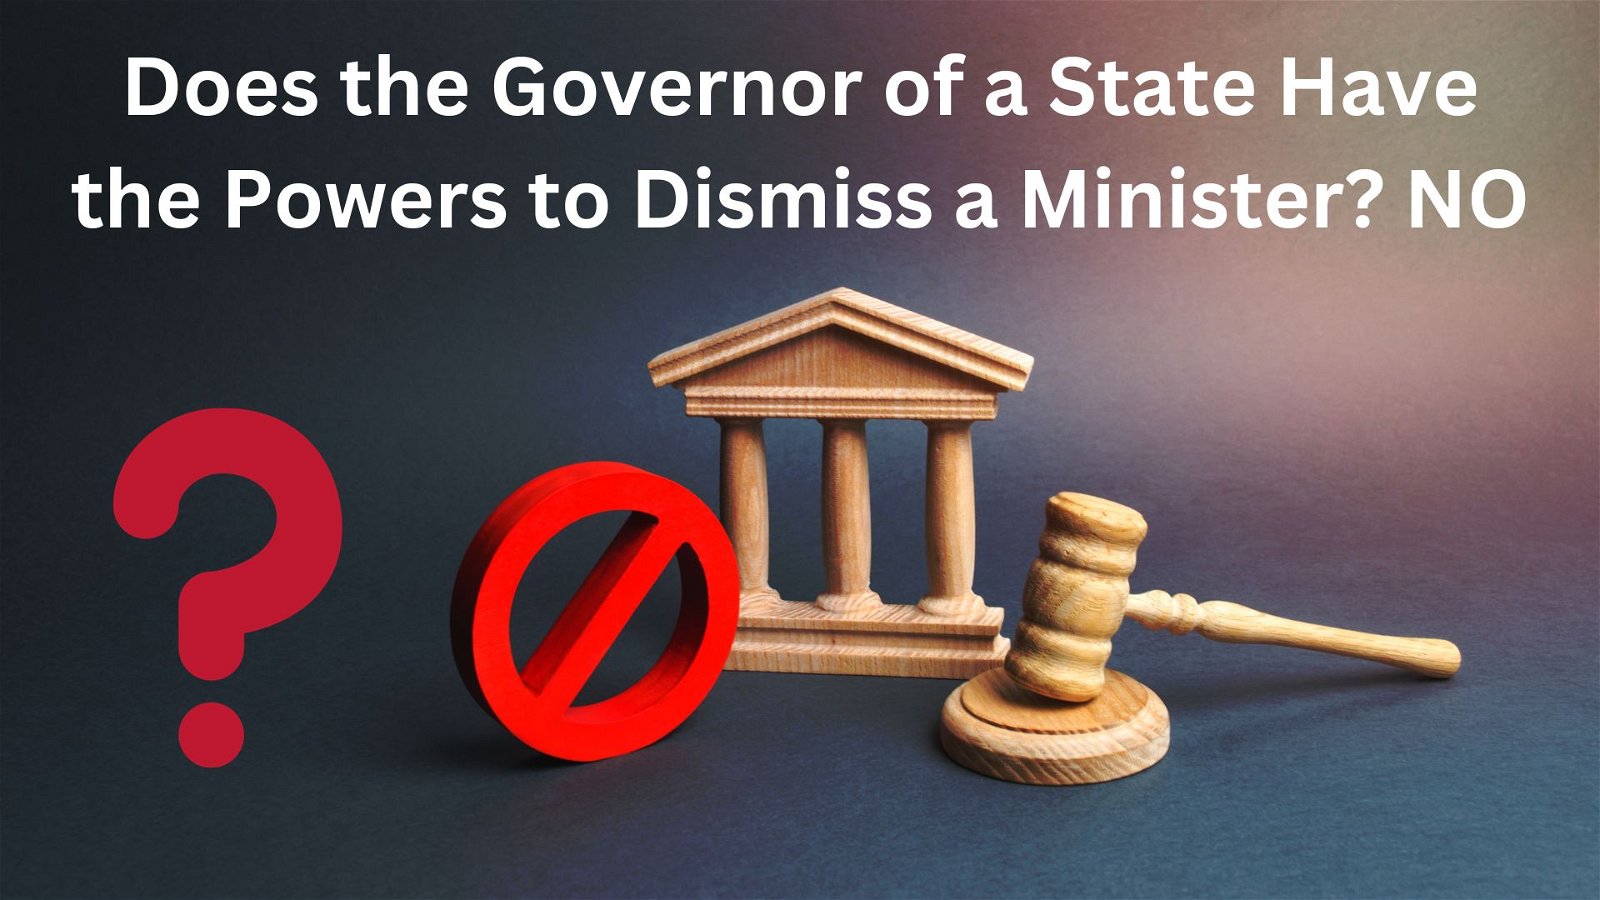 Does the Governor of a State Have the Powers to Dismiss a Minister NO